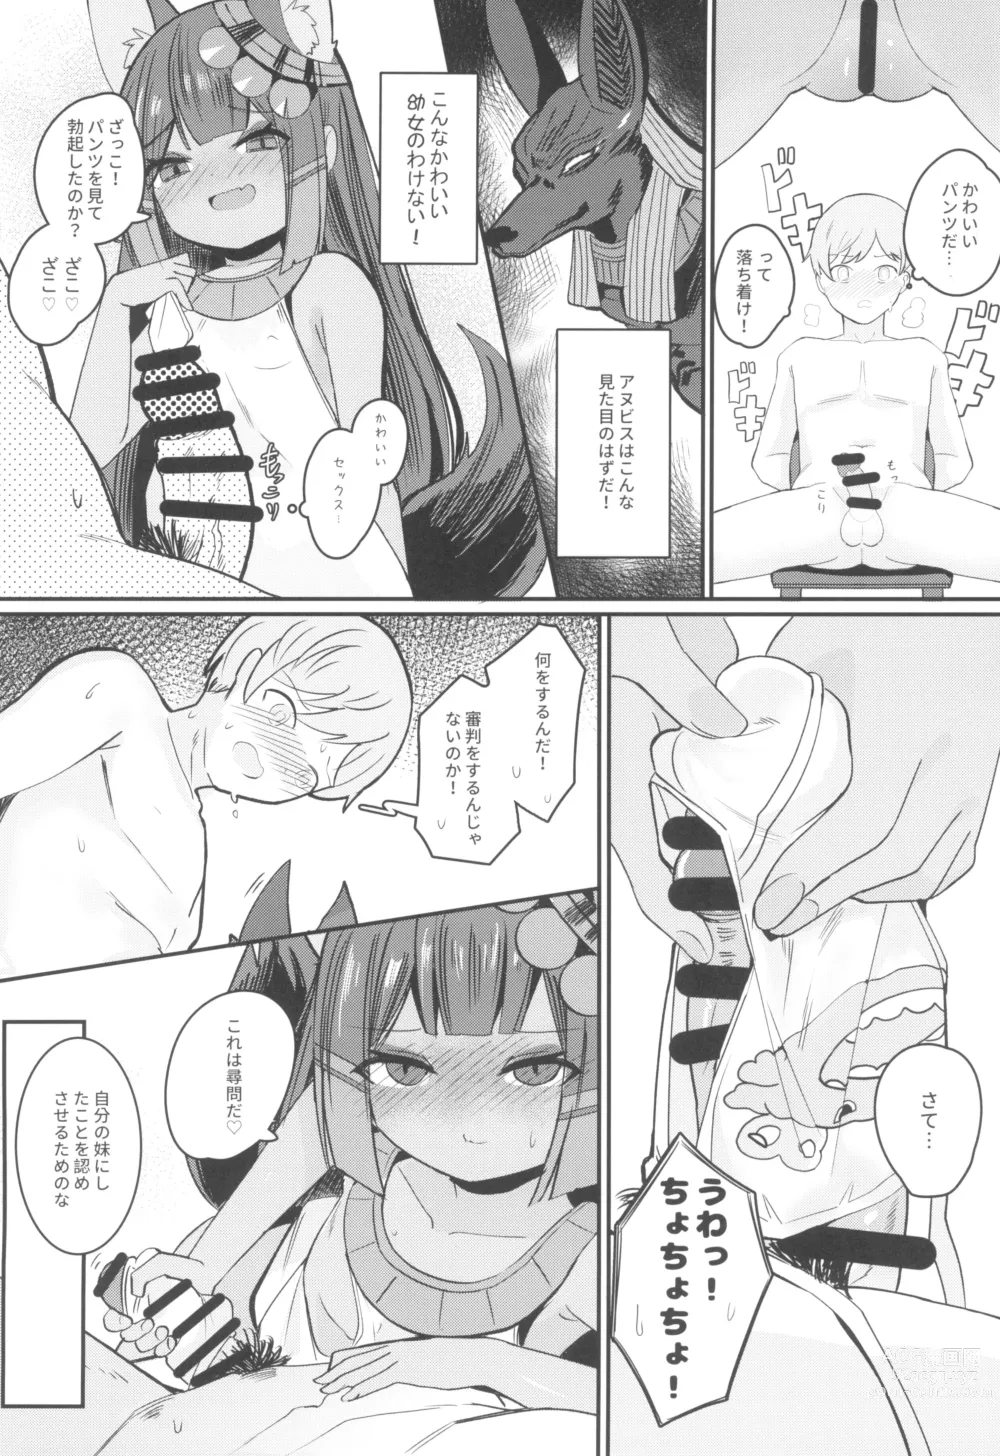 Page 10 of doujinshi Anubis no Ero Shisha Shinpan - She is the oldest FBI in human history and will find souls who have erotic thoughts about loli